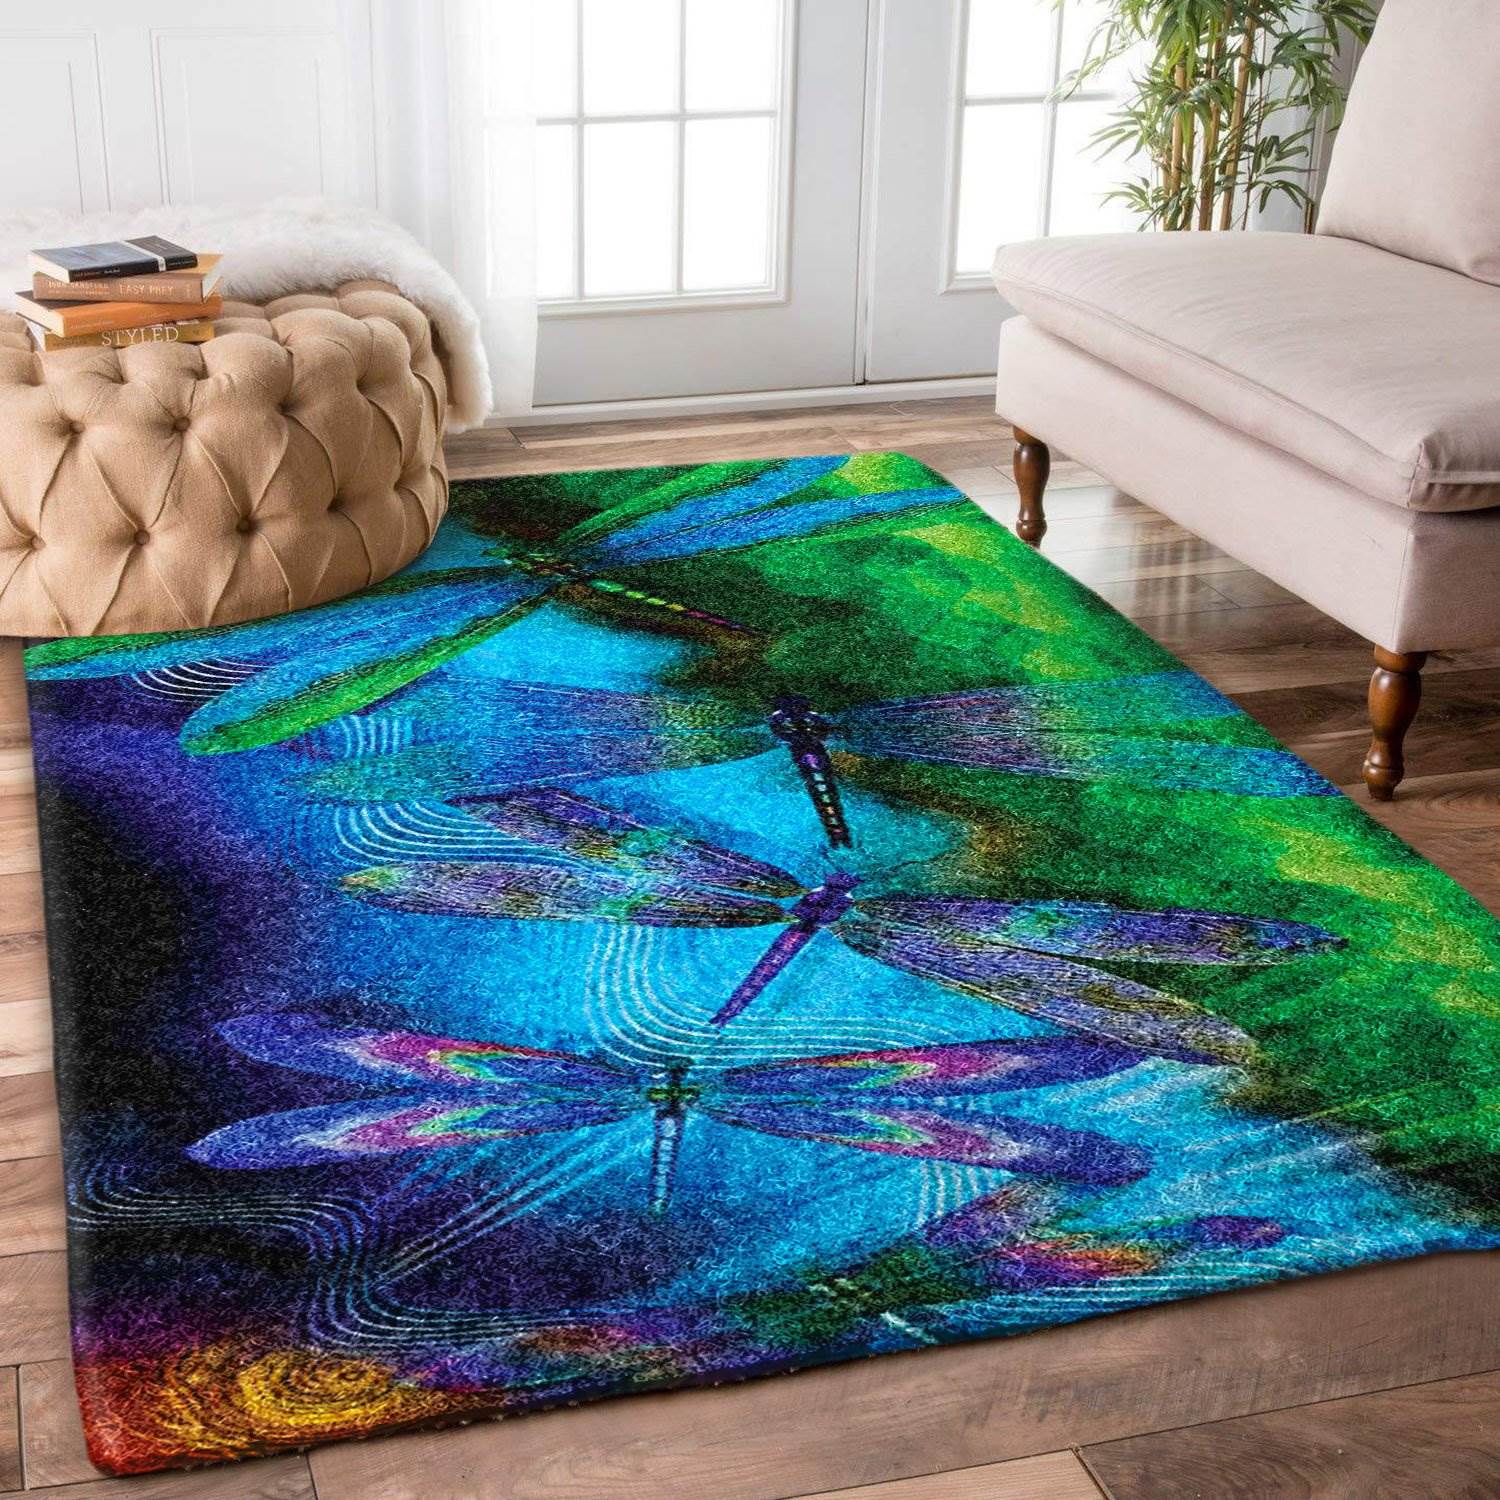 Dragonfly Limited Edition Amazon Best Seller Sku 267977 Rug